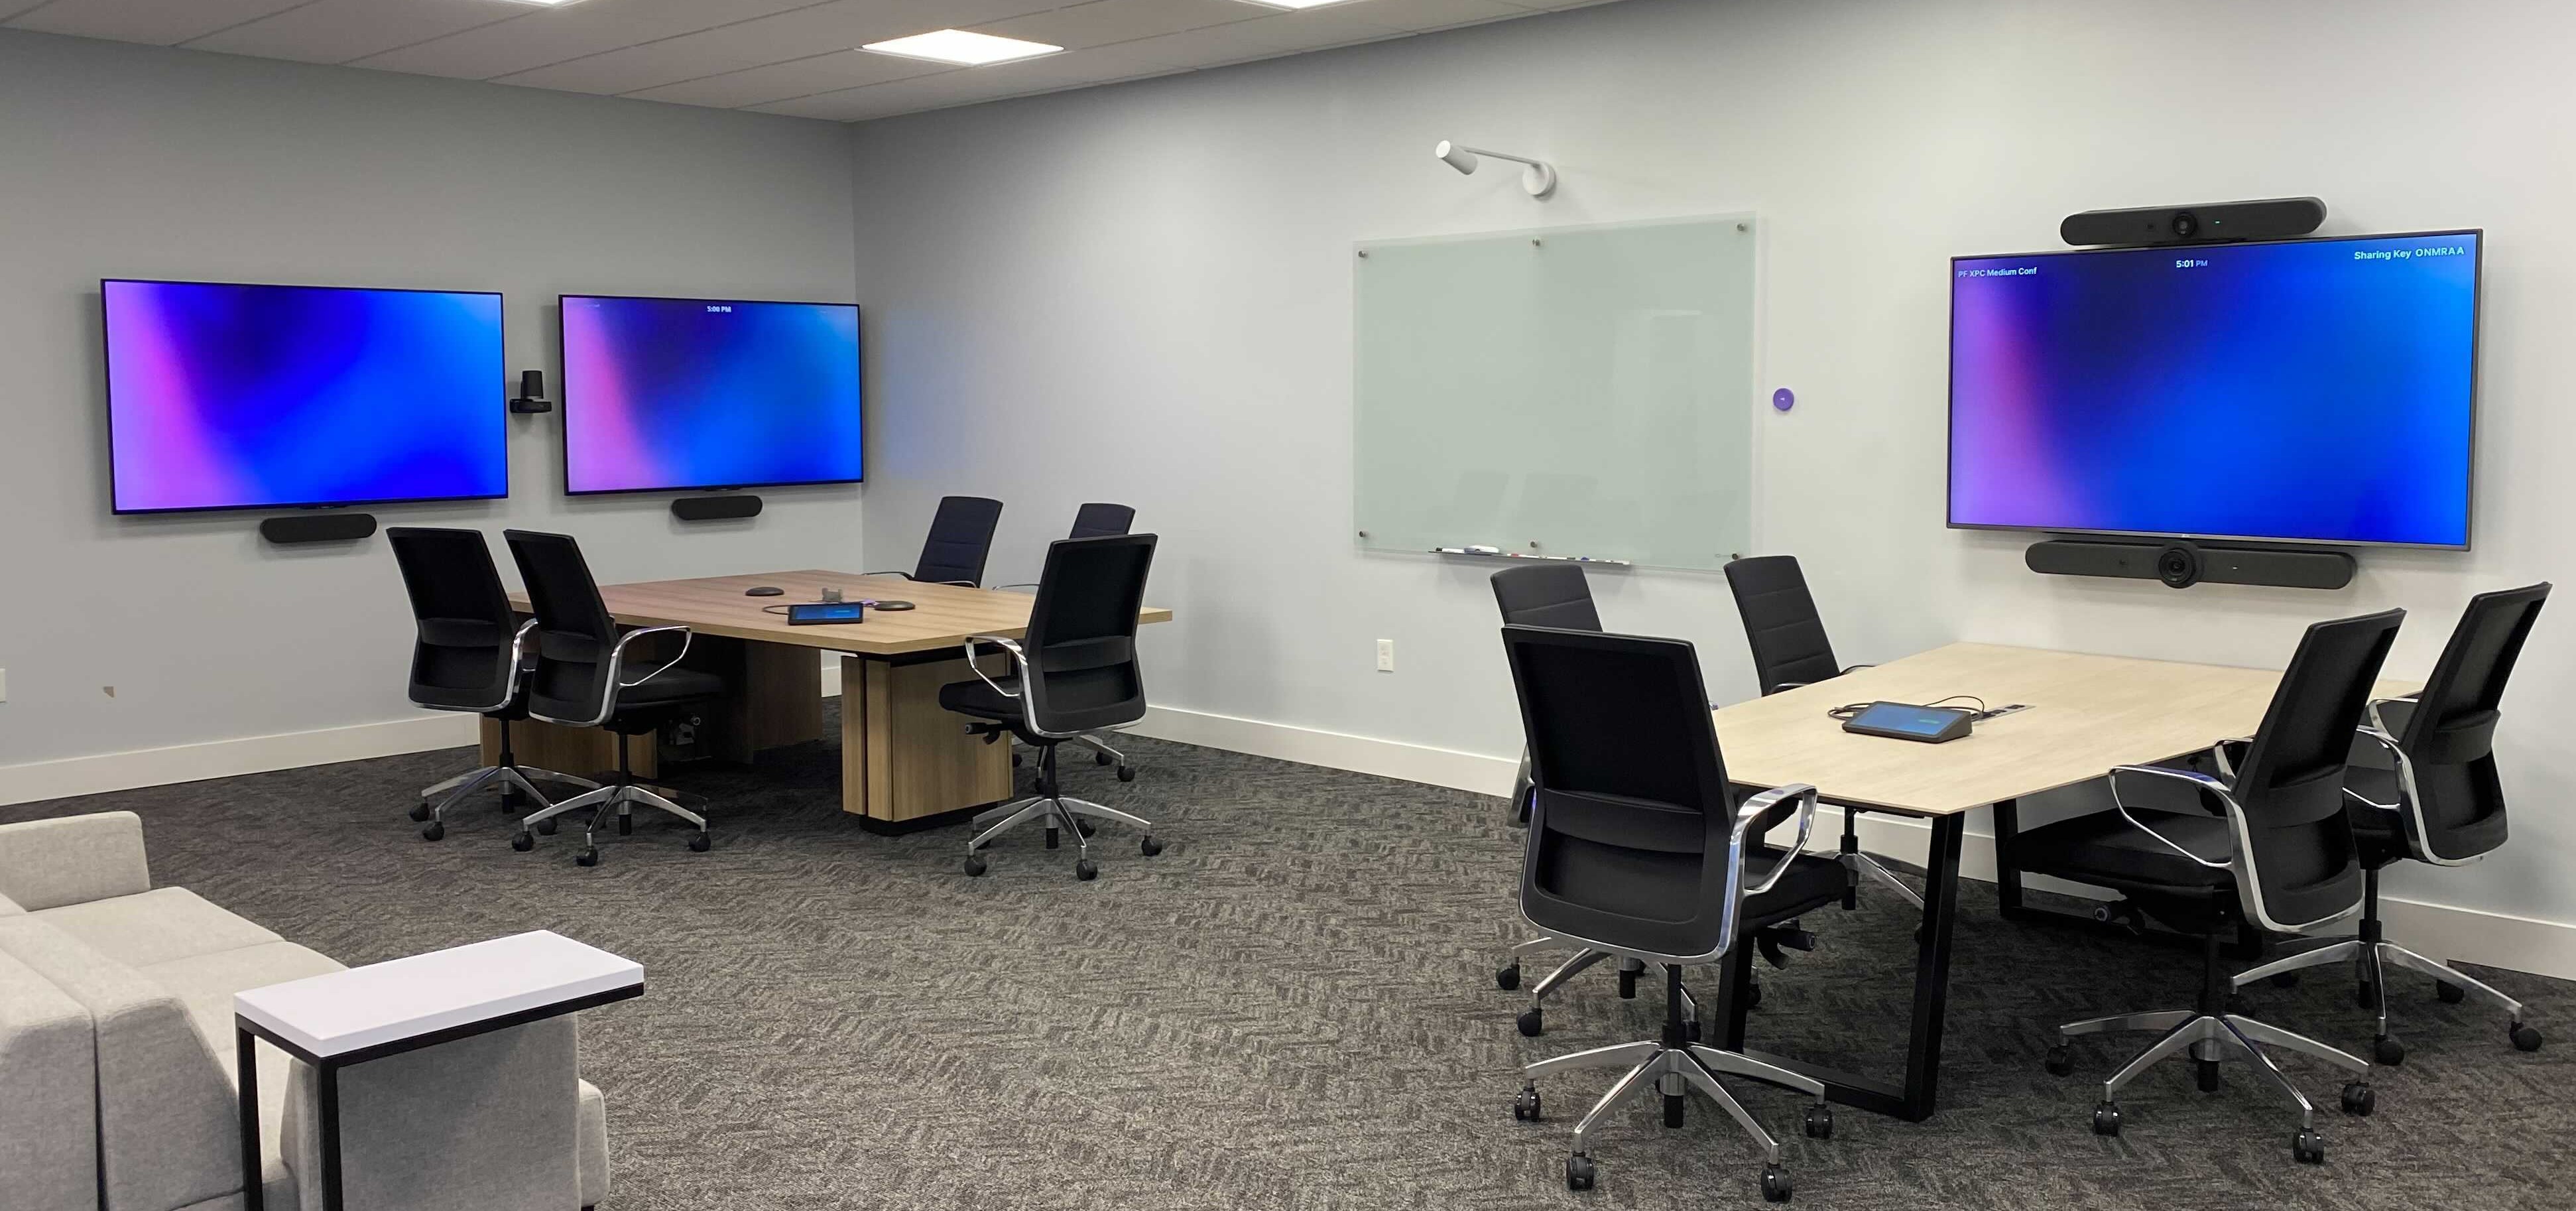 Welcome to Our Experience Center - Demo a Variety of Conference Room Systems